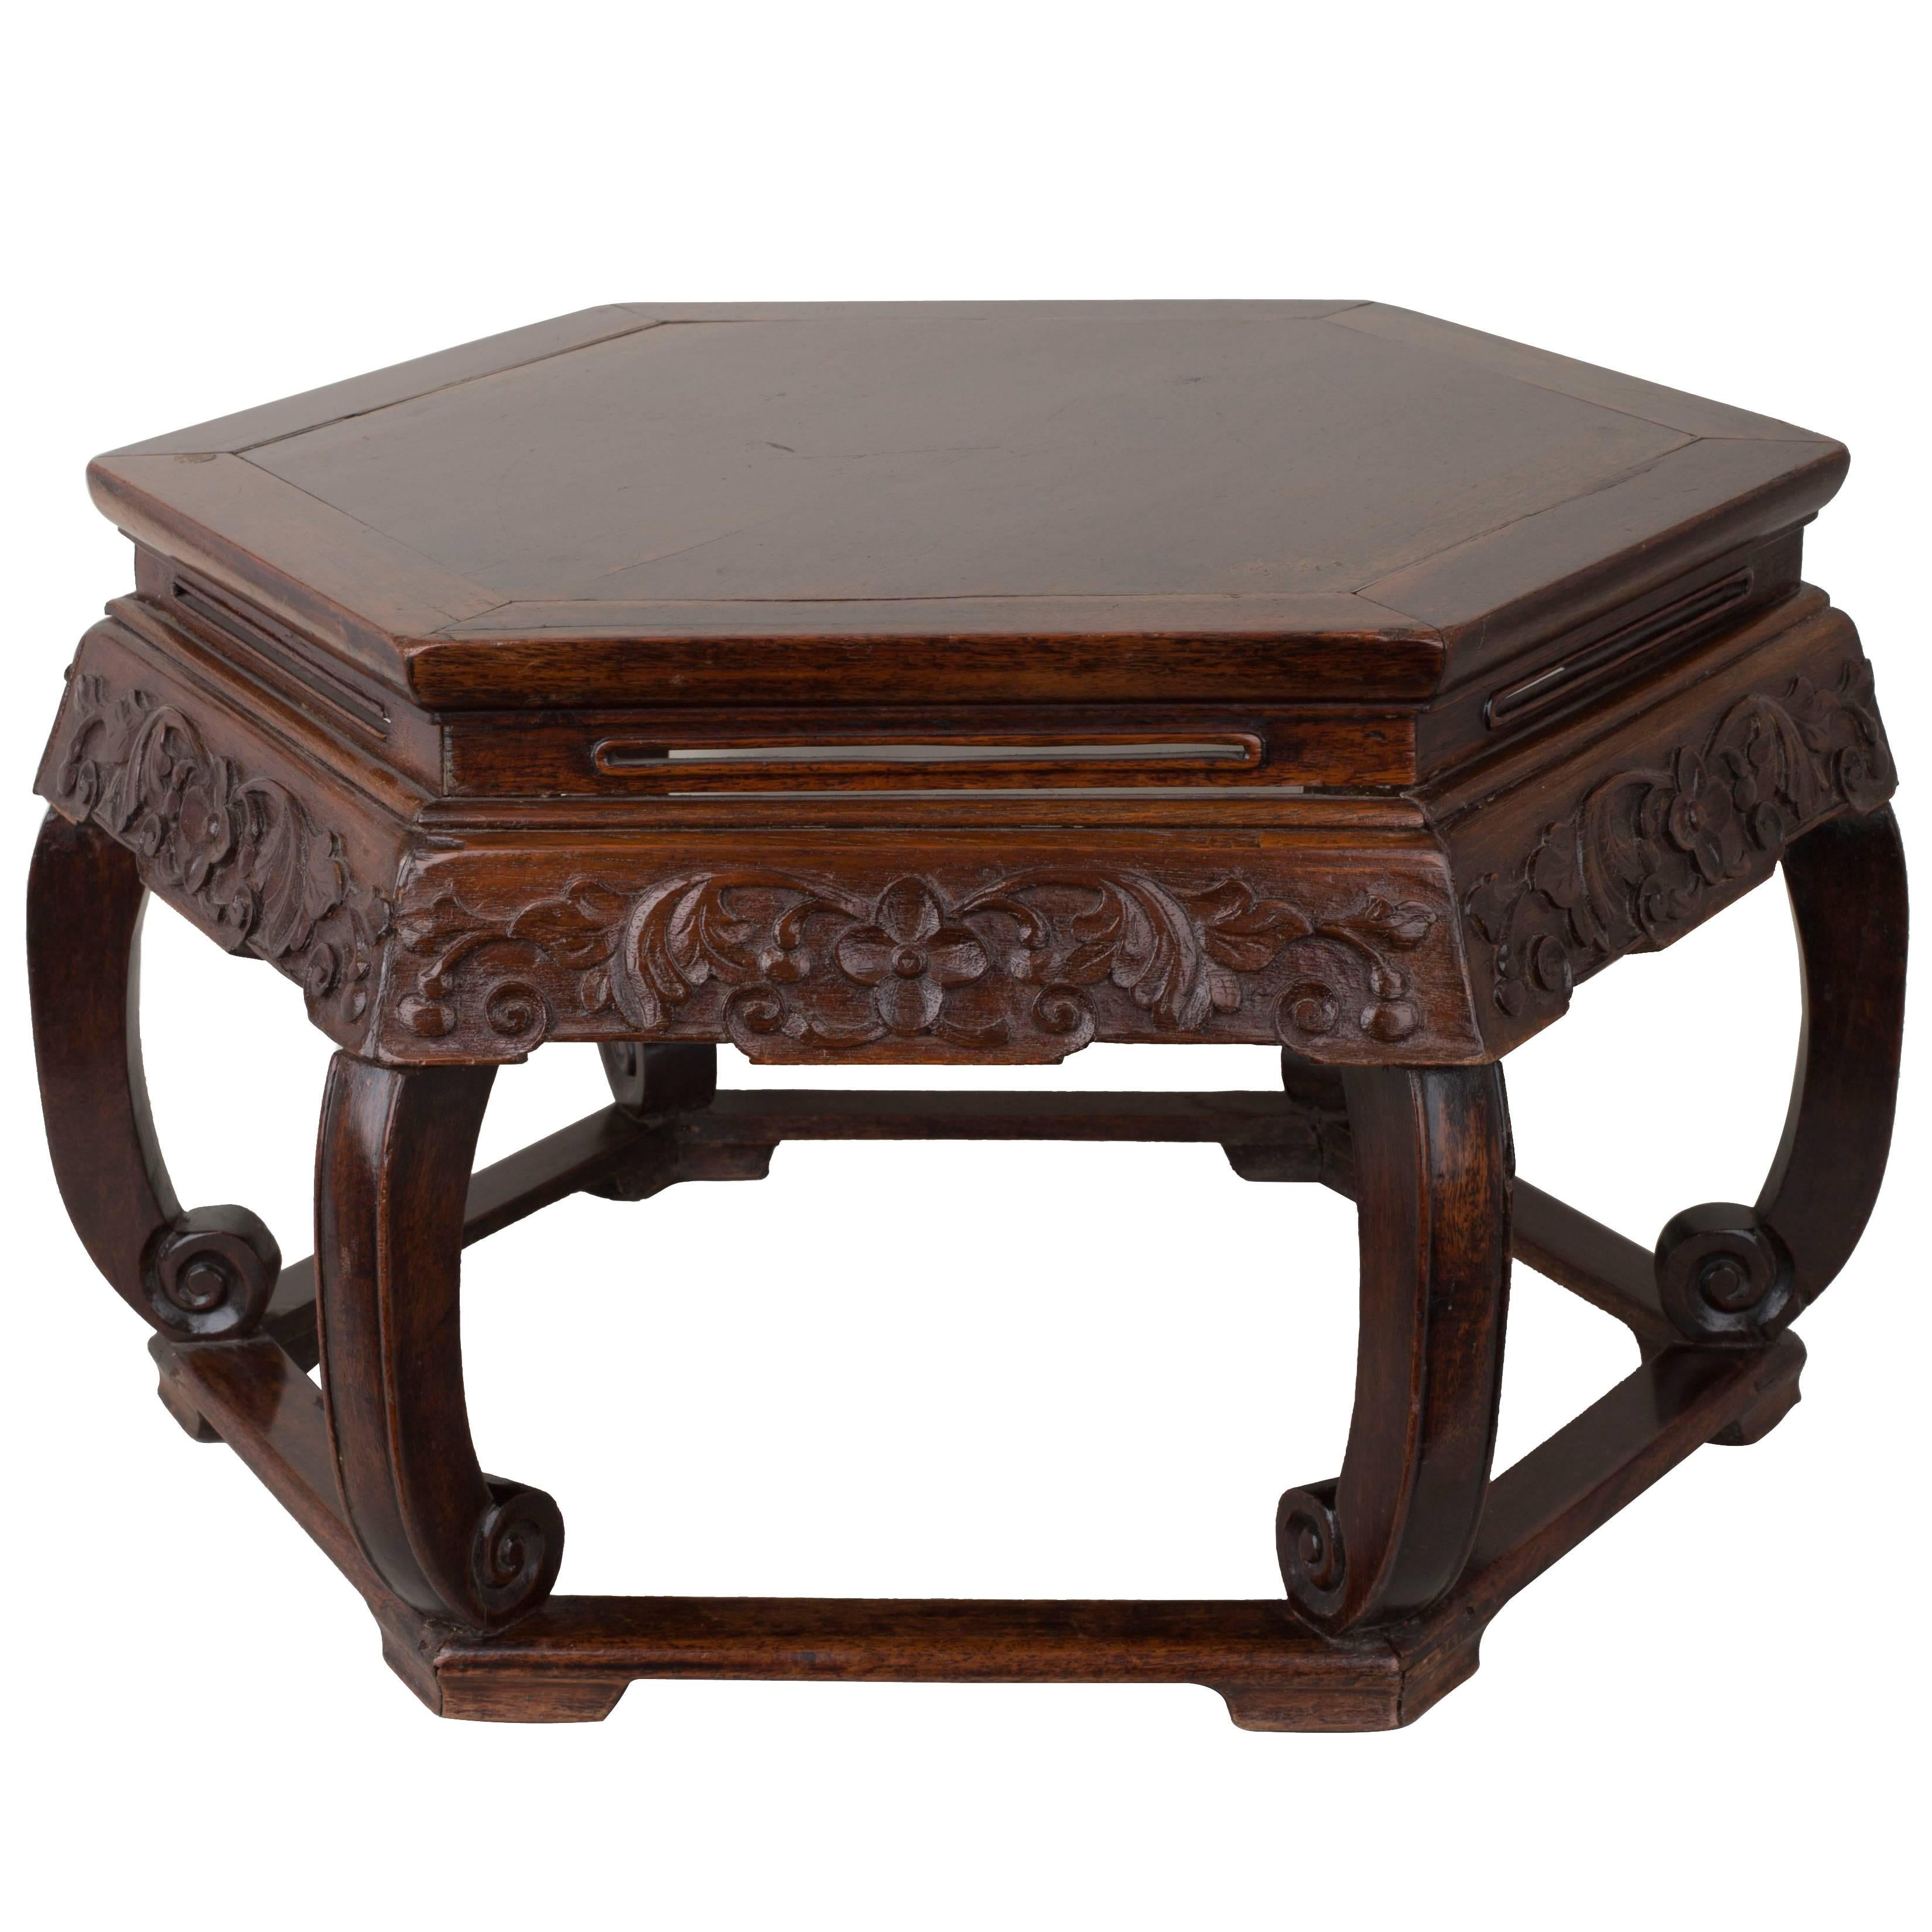 Chinese Hong-Mu Hexagonal Facetted Table in Relief, 19th Century For Sale